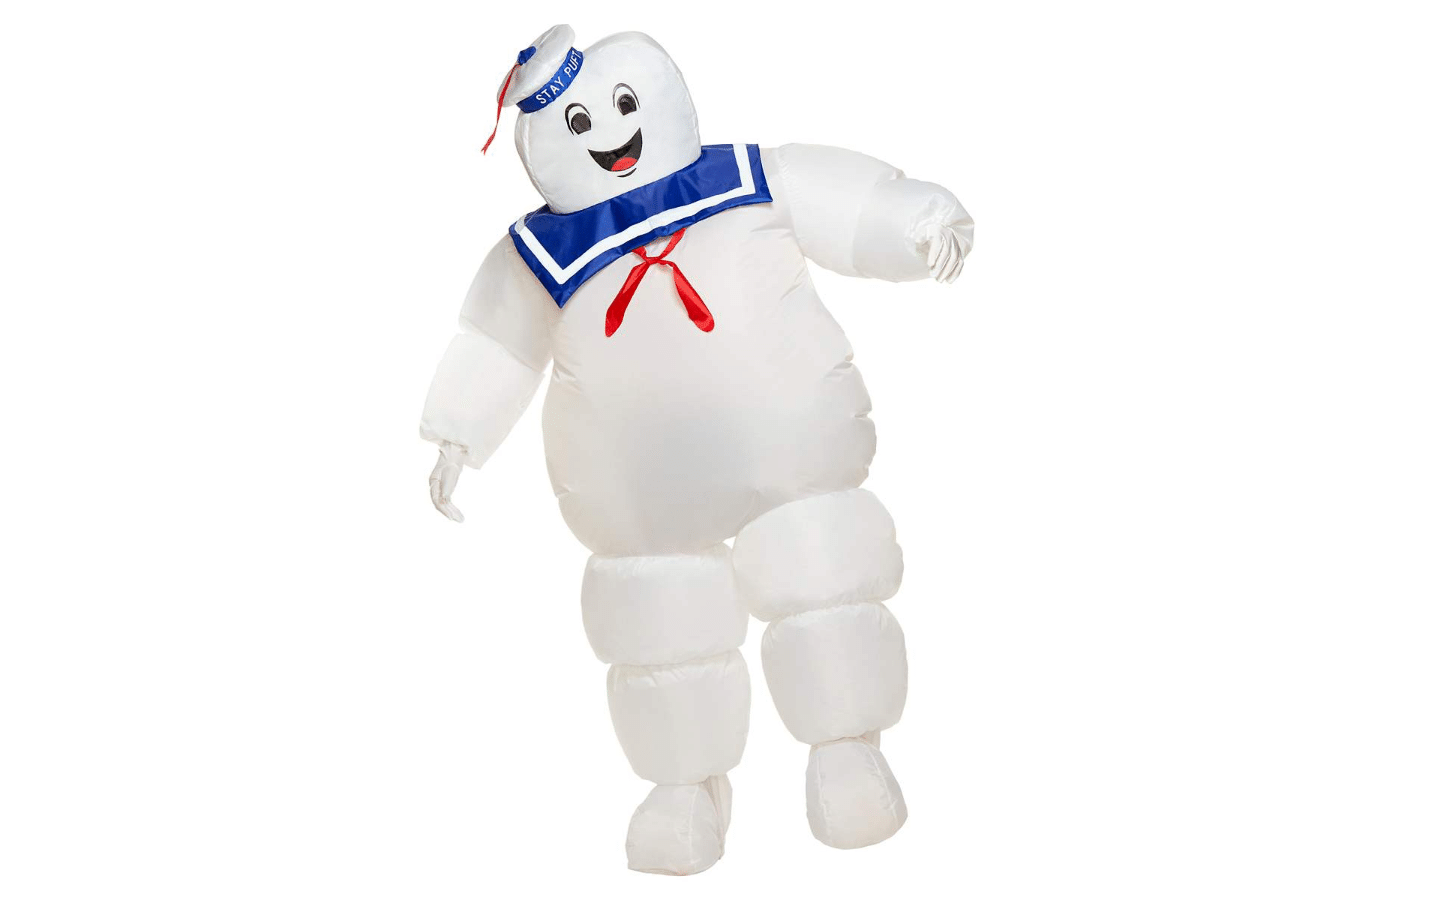 Funny Inflatable Costumes 2022: Stay Puft Marshmallow Man.